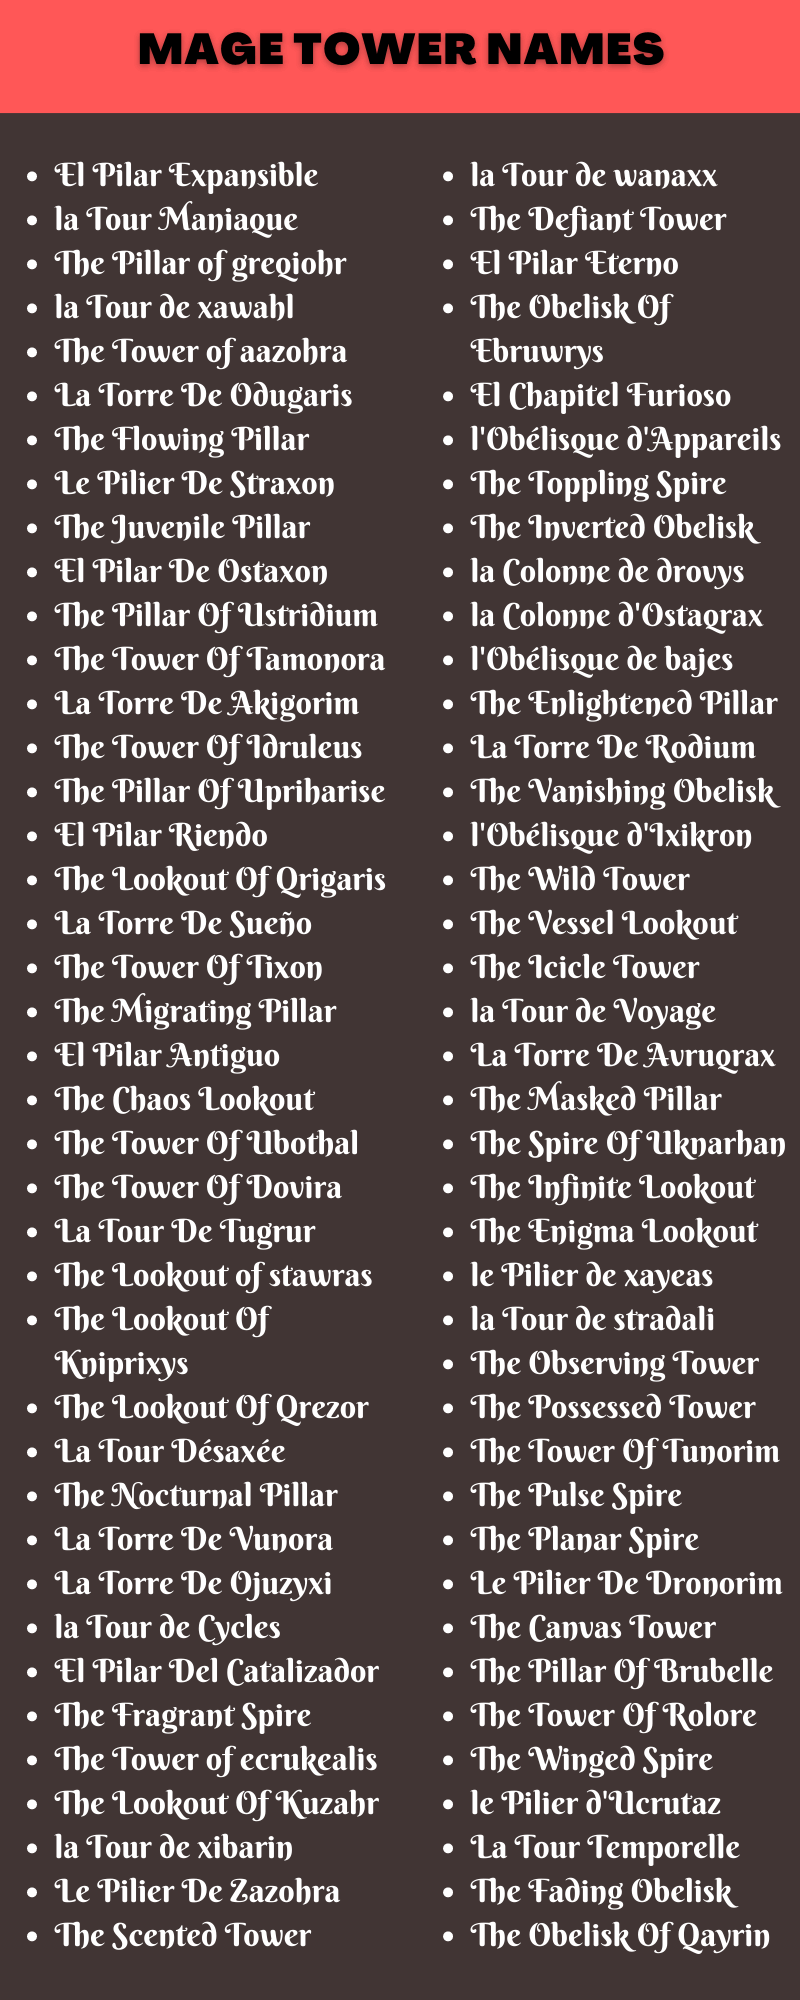 Mage Tower Names